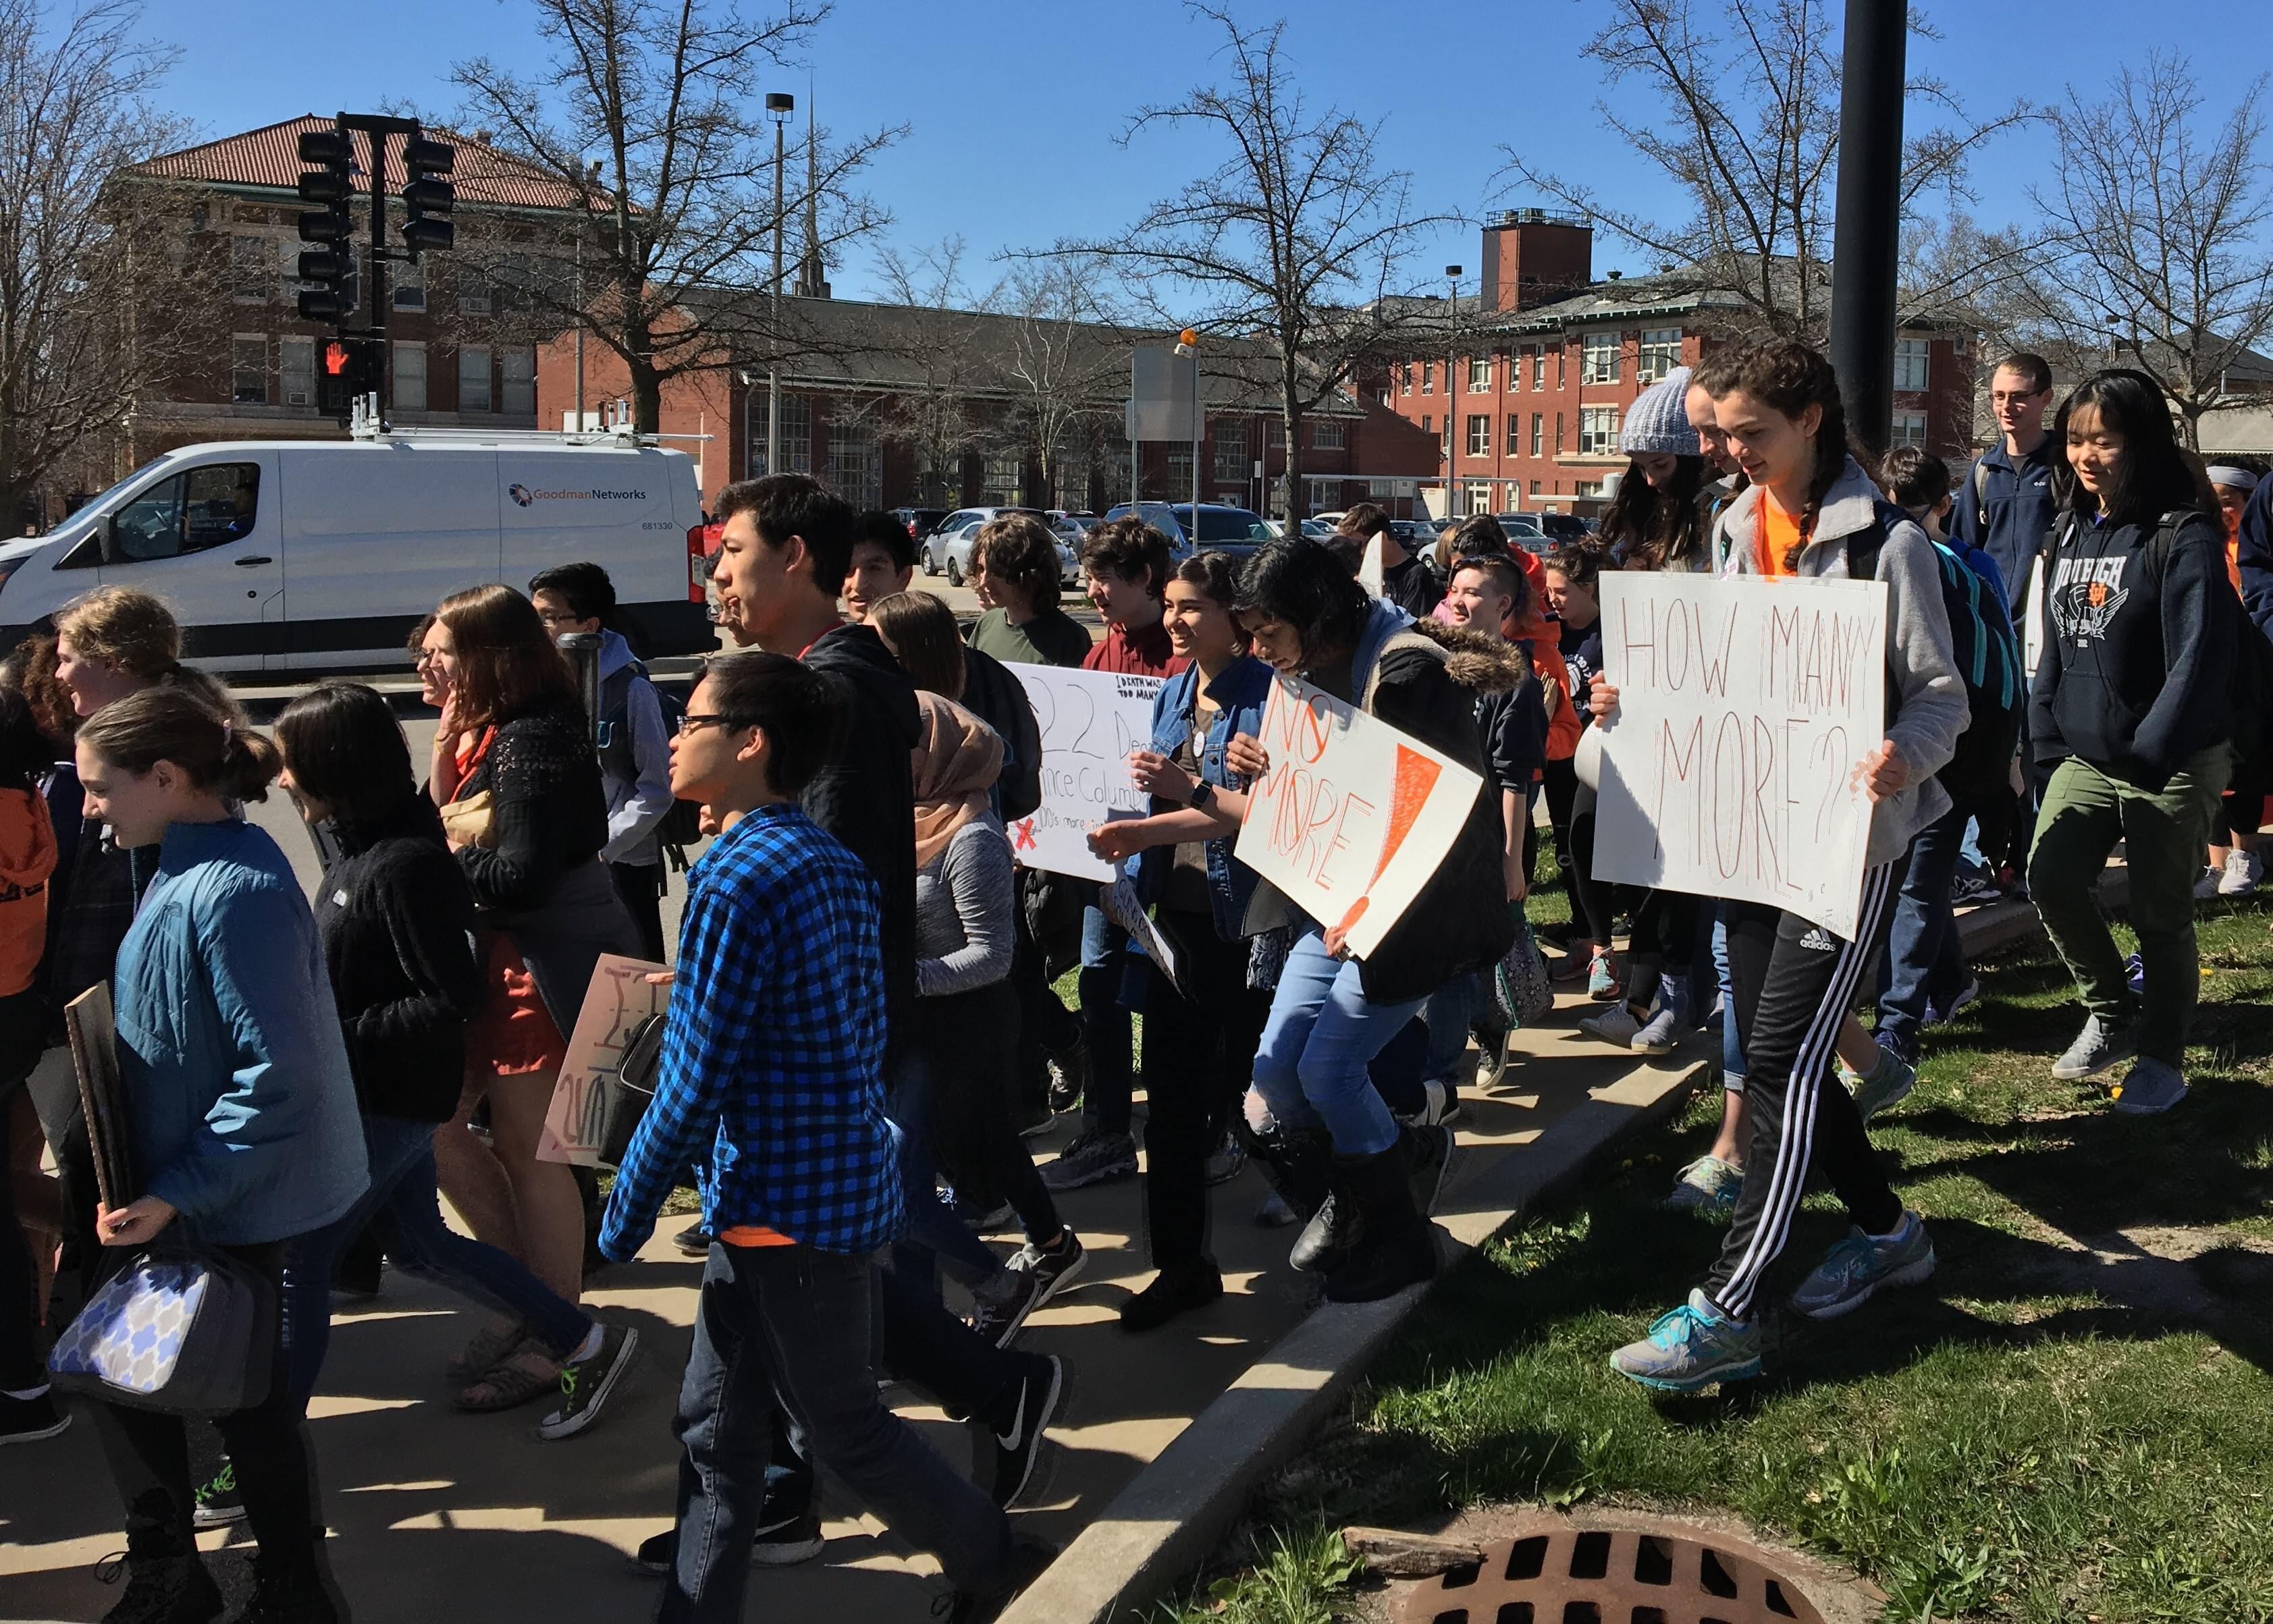 Uni High Students marching and displaying signs advocating for gun reform. 